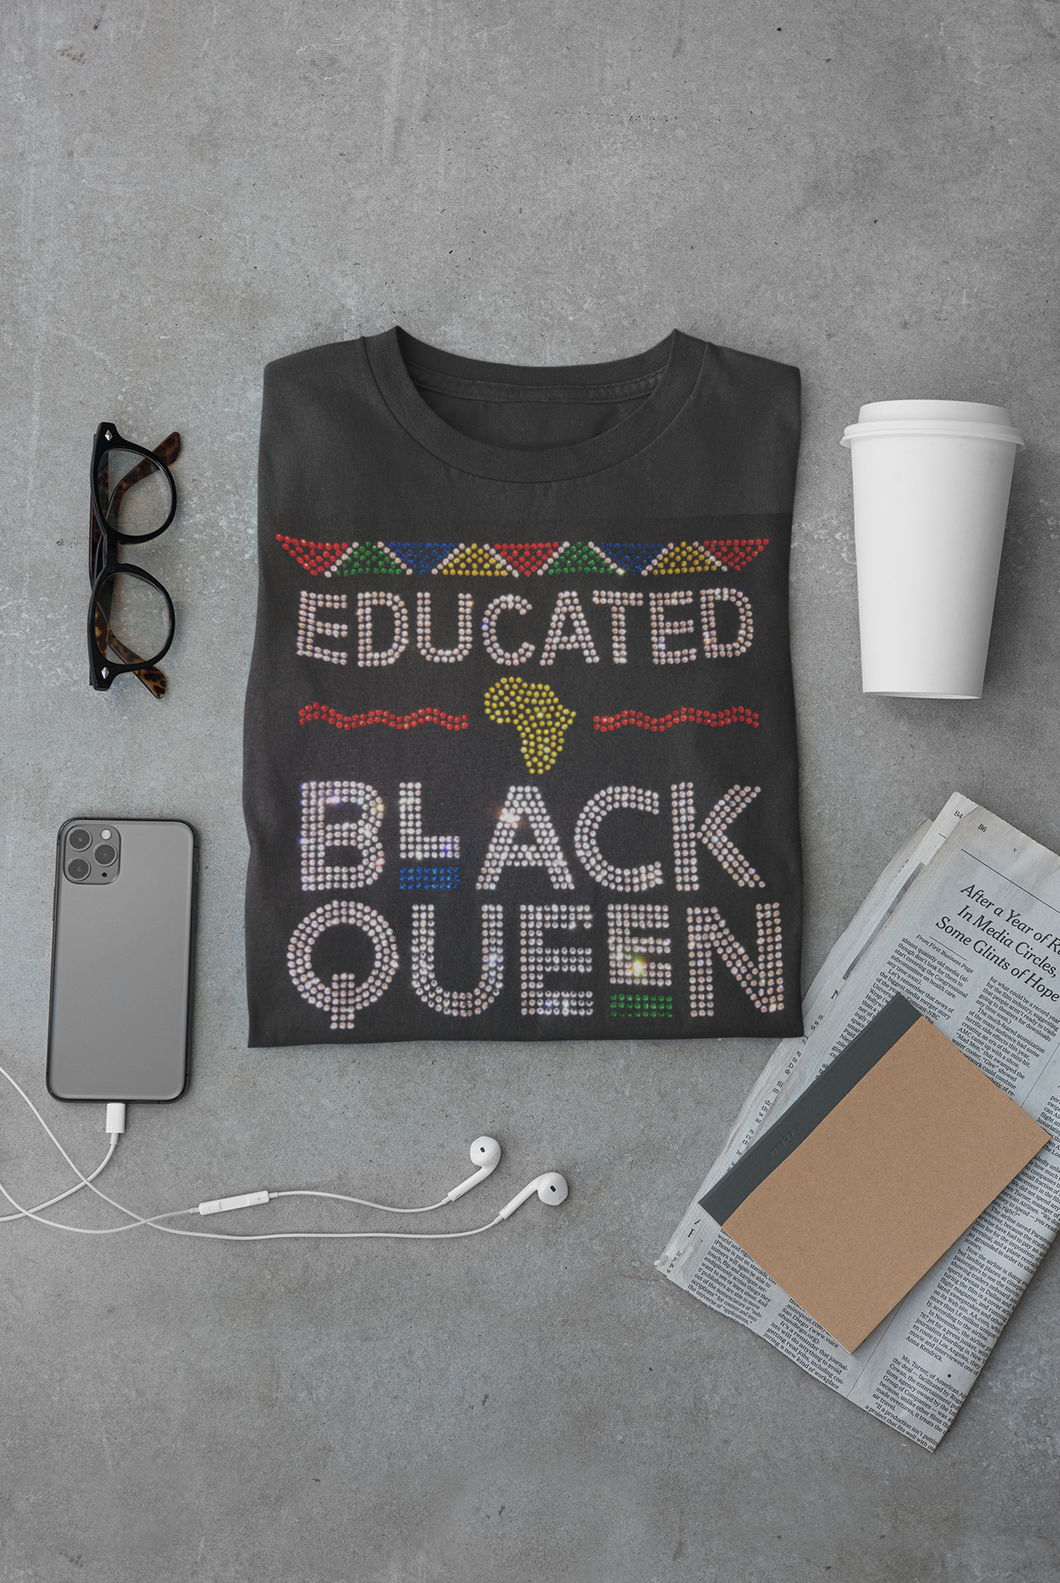 Educated Black Queen - Xtreme Bling